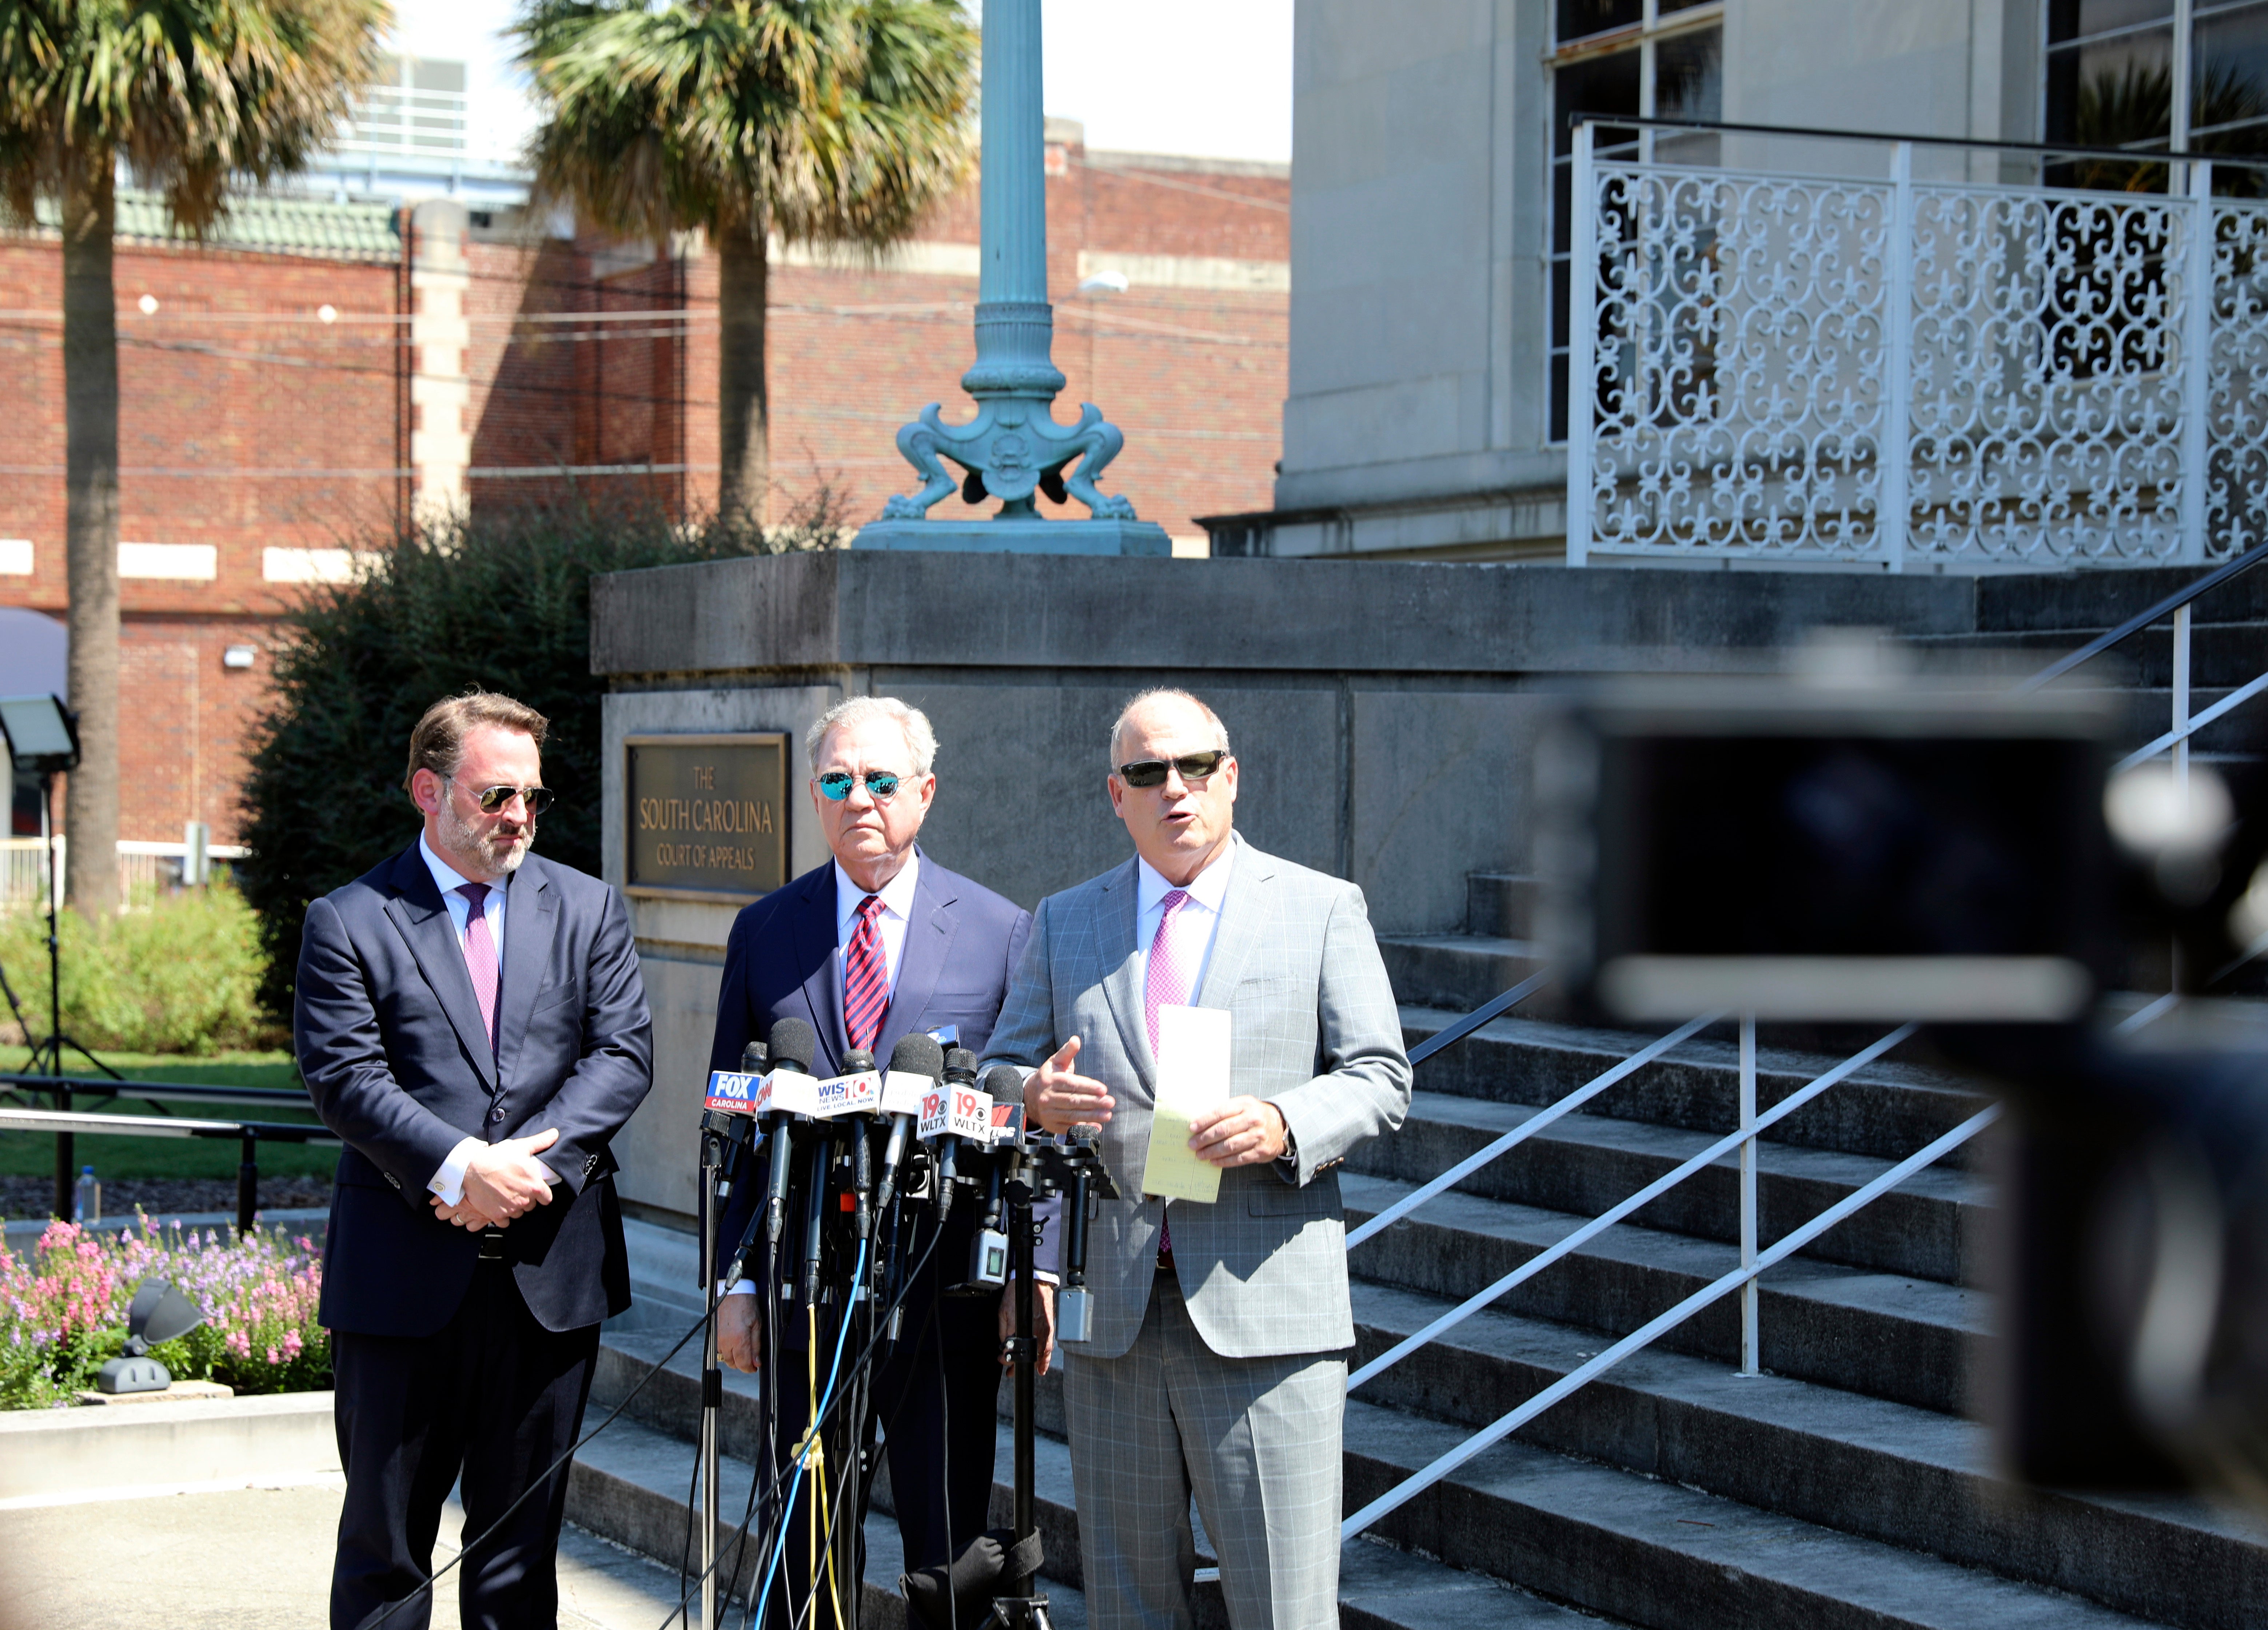 Alex Murdaugh's attorneys Phillip Barber, from left, Dick Harpootlian and Jim Griffin speak at a news conference after filing an appeal of Murdaugh's double murder conviction on 5 September